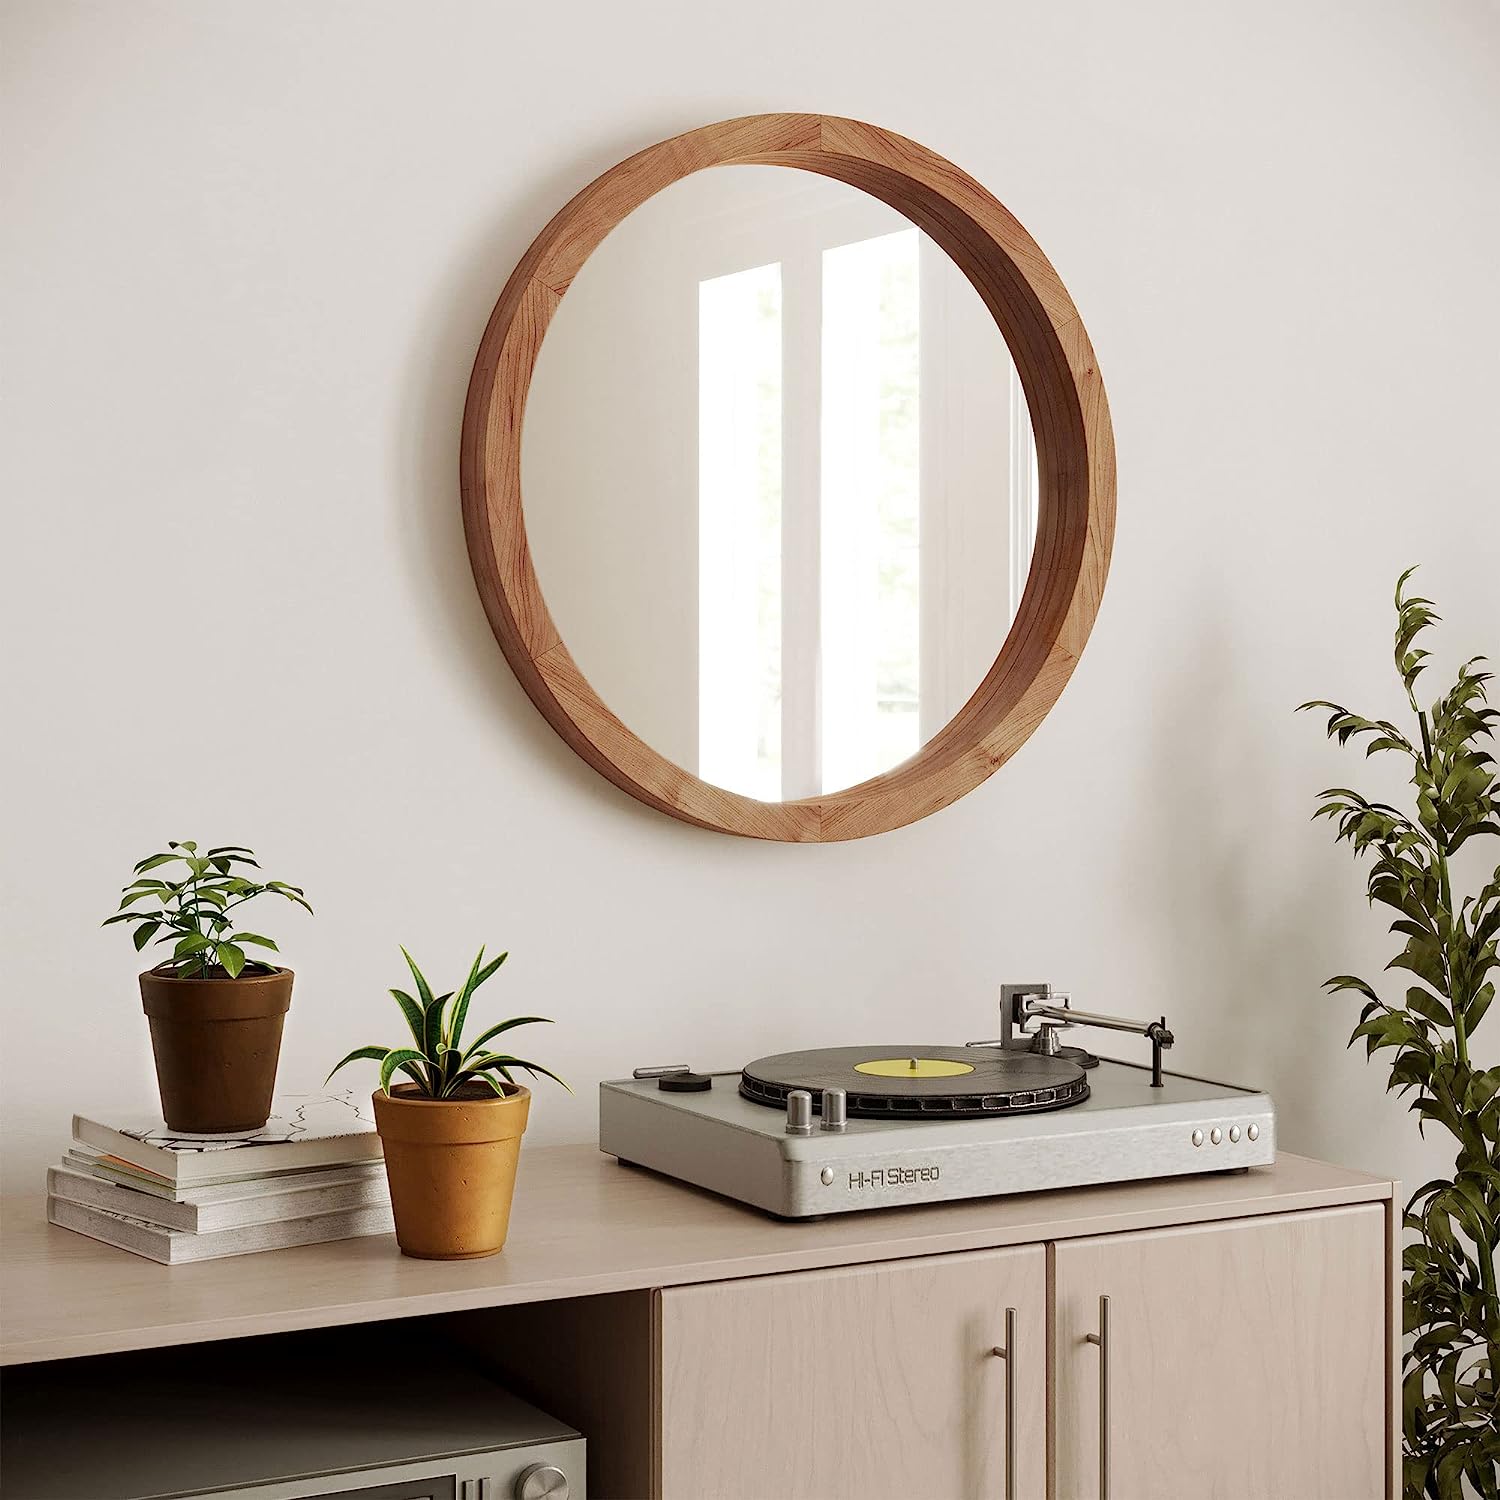 24" Round Decorative Wood Farmhouse, Rustic Wall Mirror, Bedroom Mirrors for Wall Decor, Hanging Mirror for Living Room, Bathroom Vanity Mirror, Brown